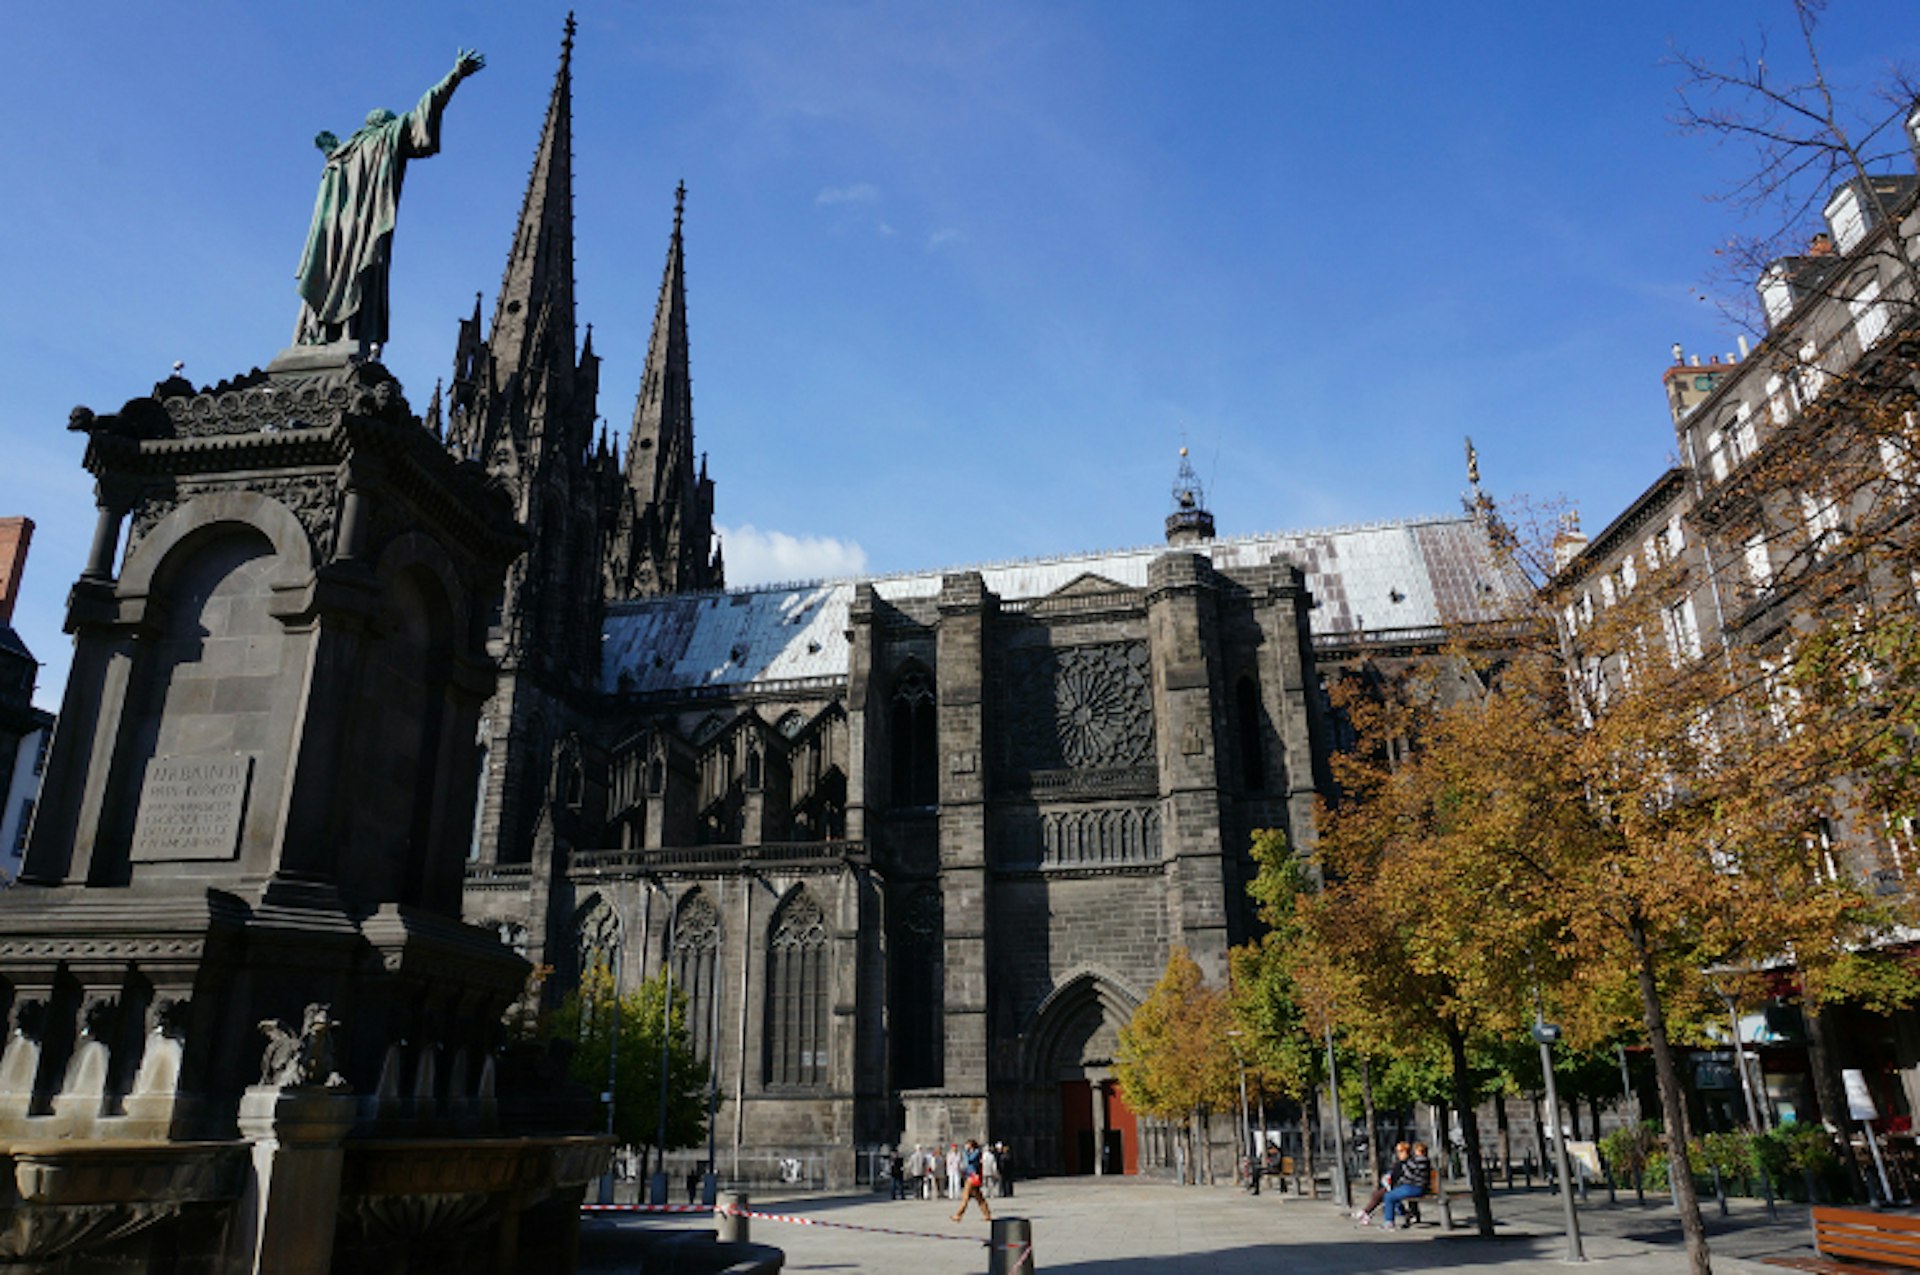 Clermont-Ferrand Cathedral, overlooking Place de la Victoire in all its Gothic glory. Image by Anita Isalska Lonely Planet